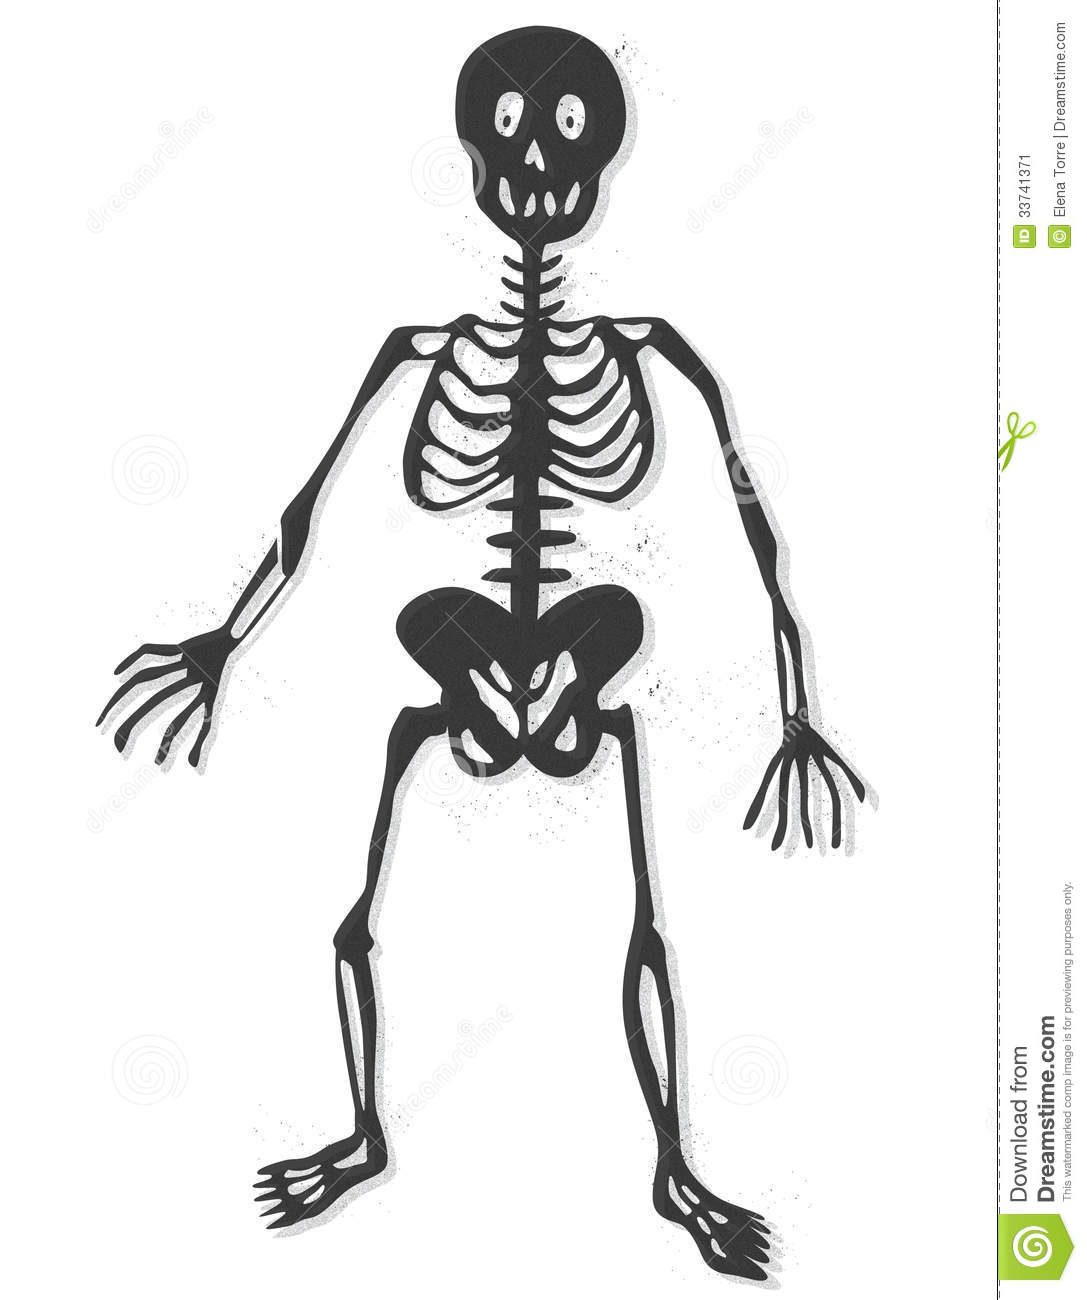 Illustration Of A Funny Human Skeleton Isolated   Vector Eps File